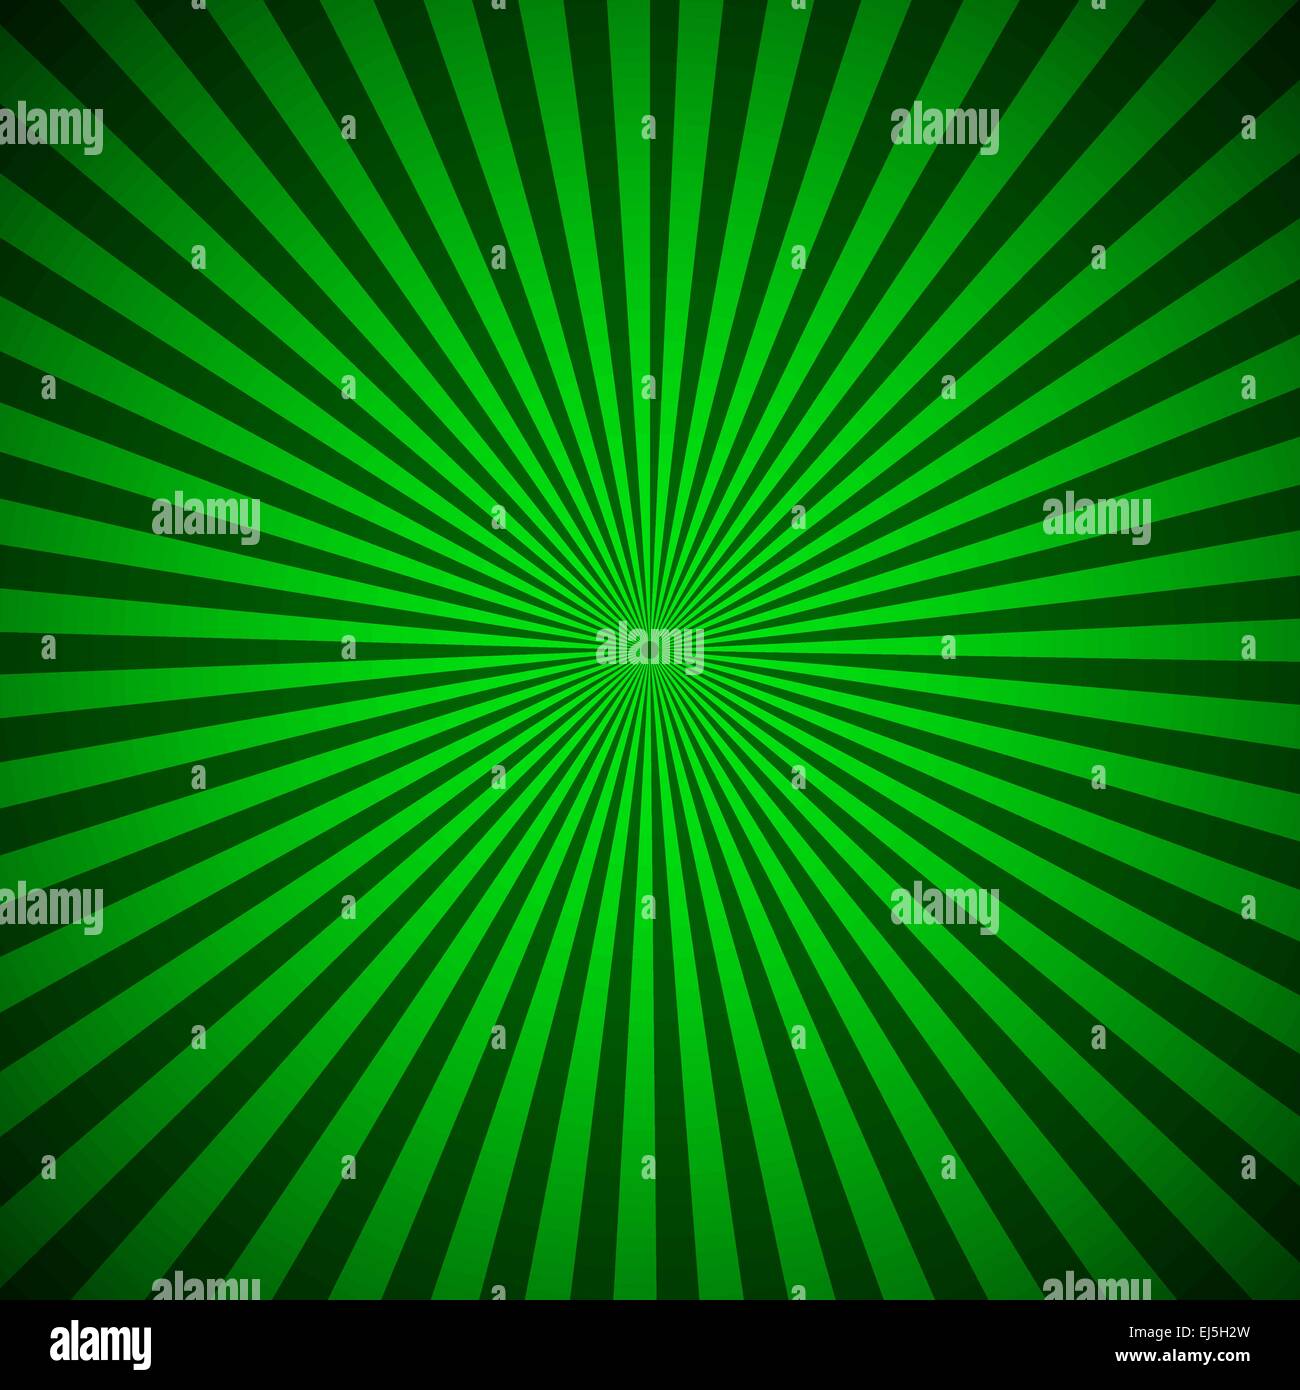 Green radial rays abstract background, vector illustration Stock Vector ...